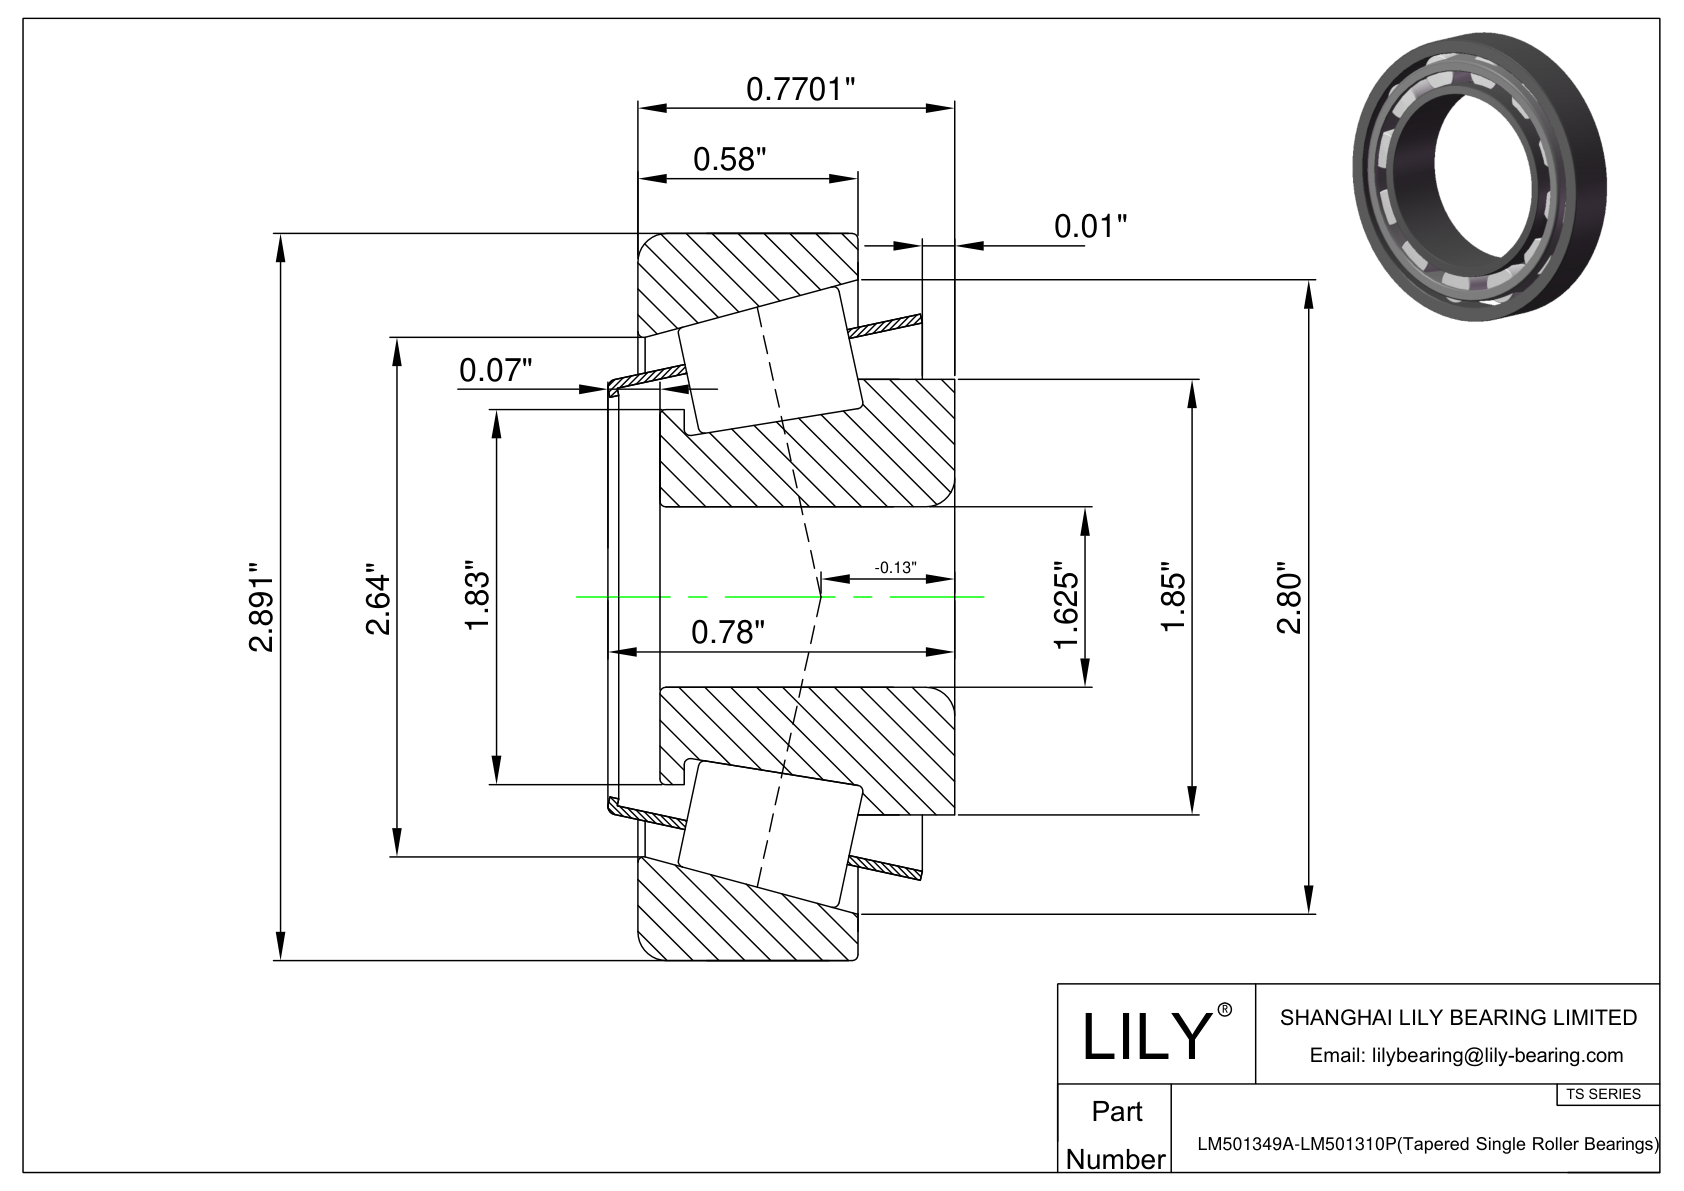 LM501349A-LM501310P TS (Tapered Single Roller Bearings) (Imperial) cad drawing